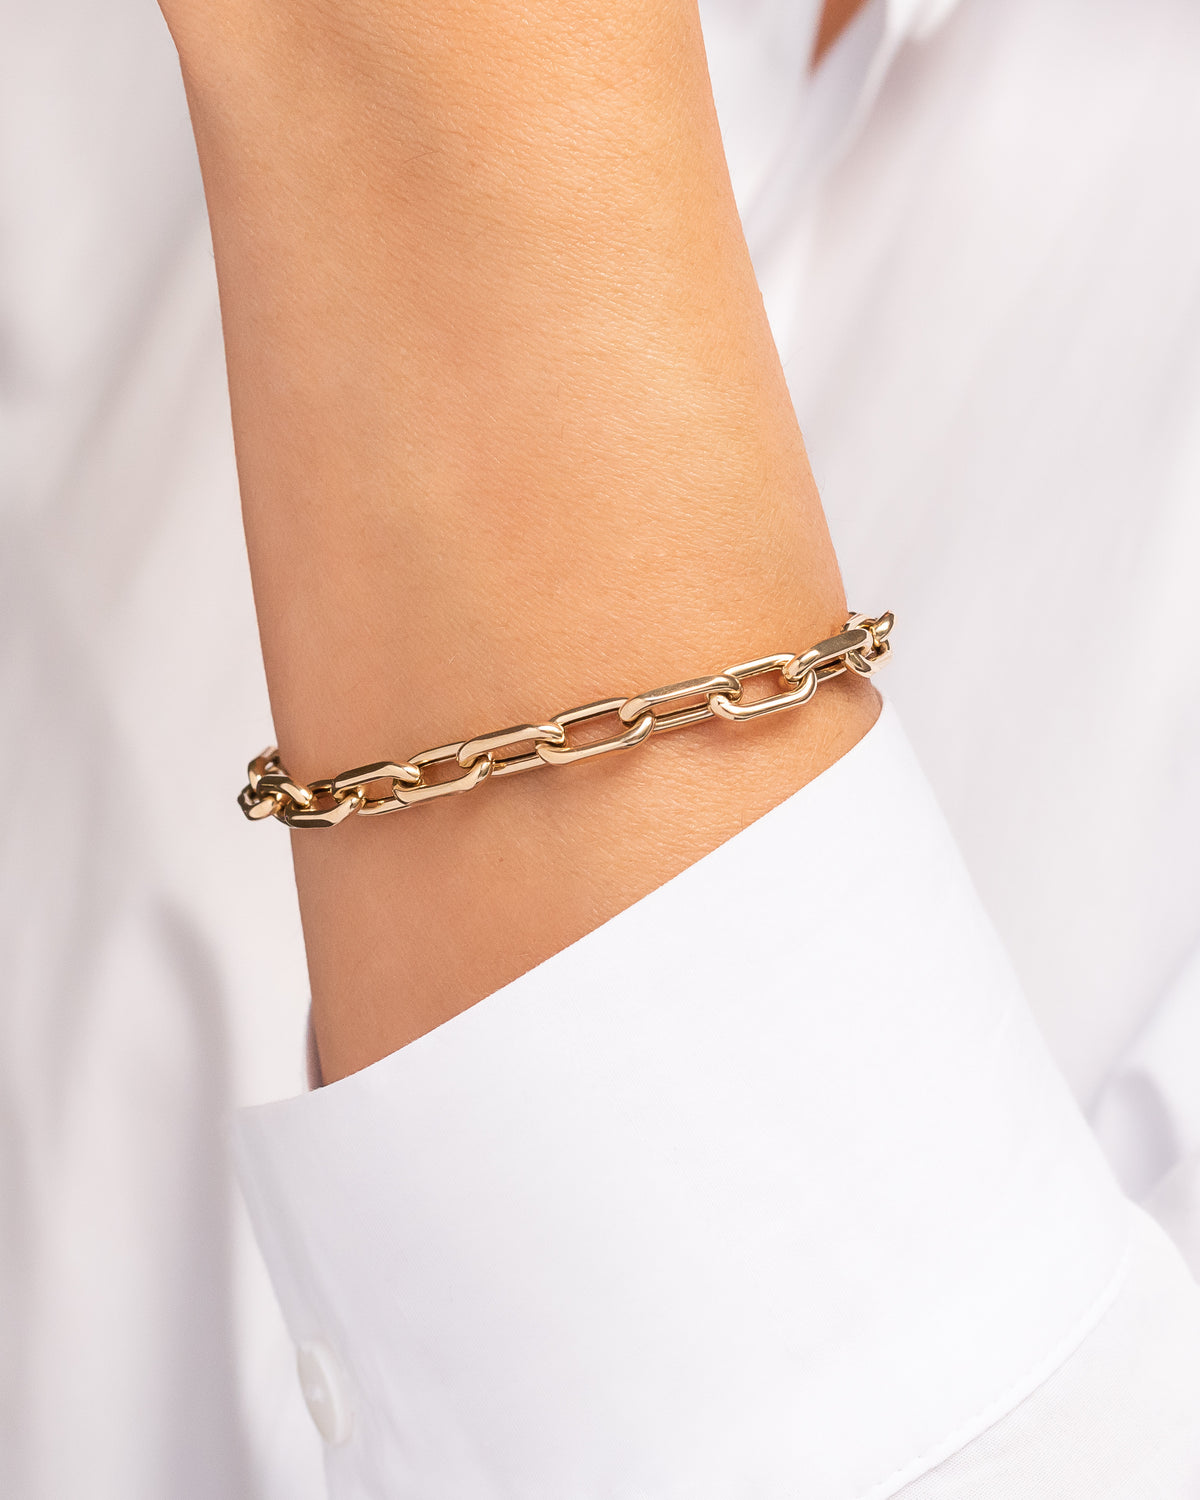 14k Gold Large Open Link Chain Bracelet with Diamond Handcuffs